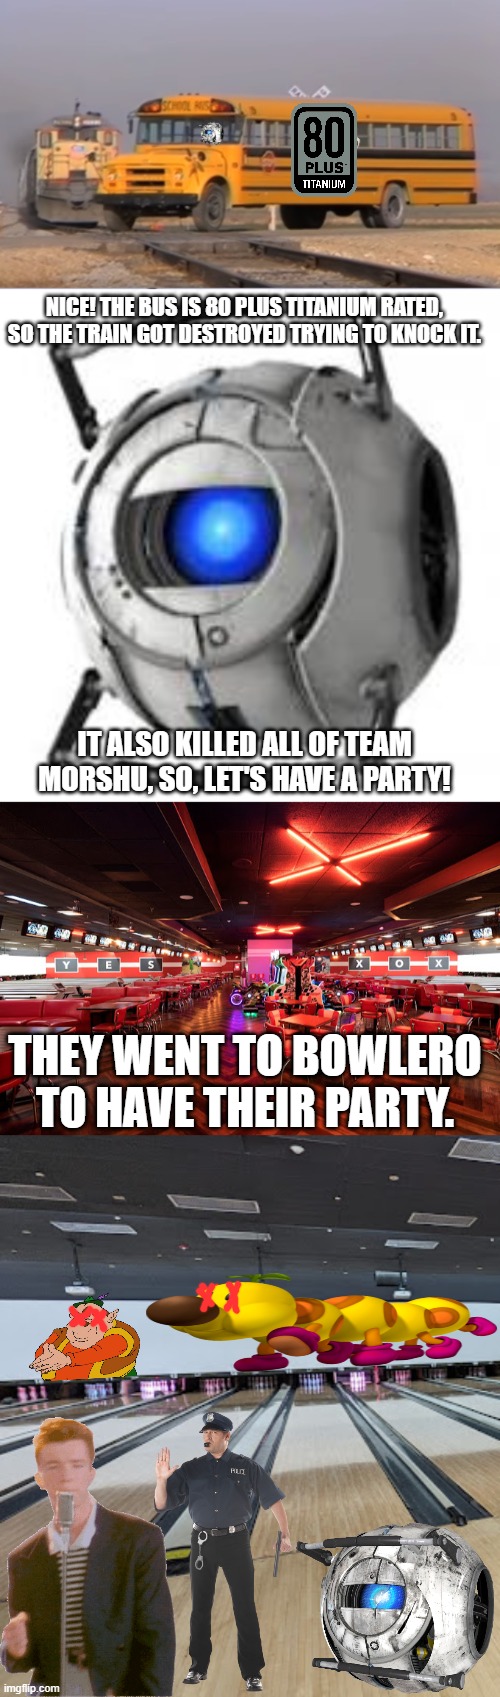 NICE! THE BUS IS 80 PLUS TITANIUM RATED, SO THE TRAIN GOT DESTROYED TRYING TO KNOCK IT. IT ALSO KILLED ALL OF TEAM MORSHU, SO, LET'S HAVE A PARTY! THEY WENT TO BOWLERO TO HAVE THEIR PARTY. | image tagged in wheatley | made w/ Imgflip meme maker